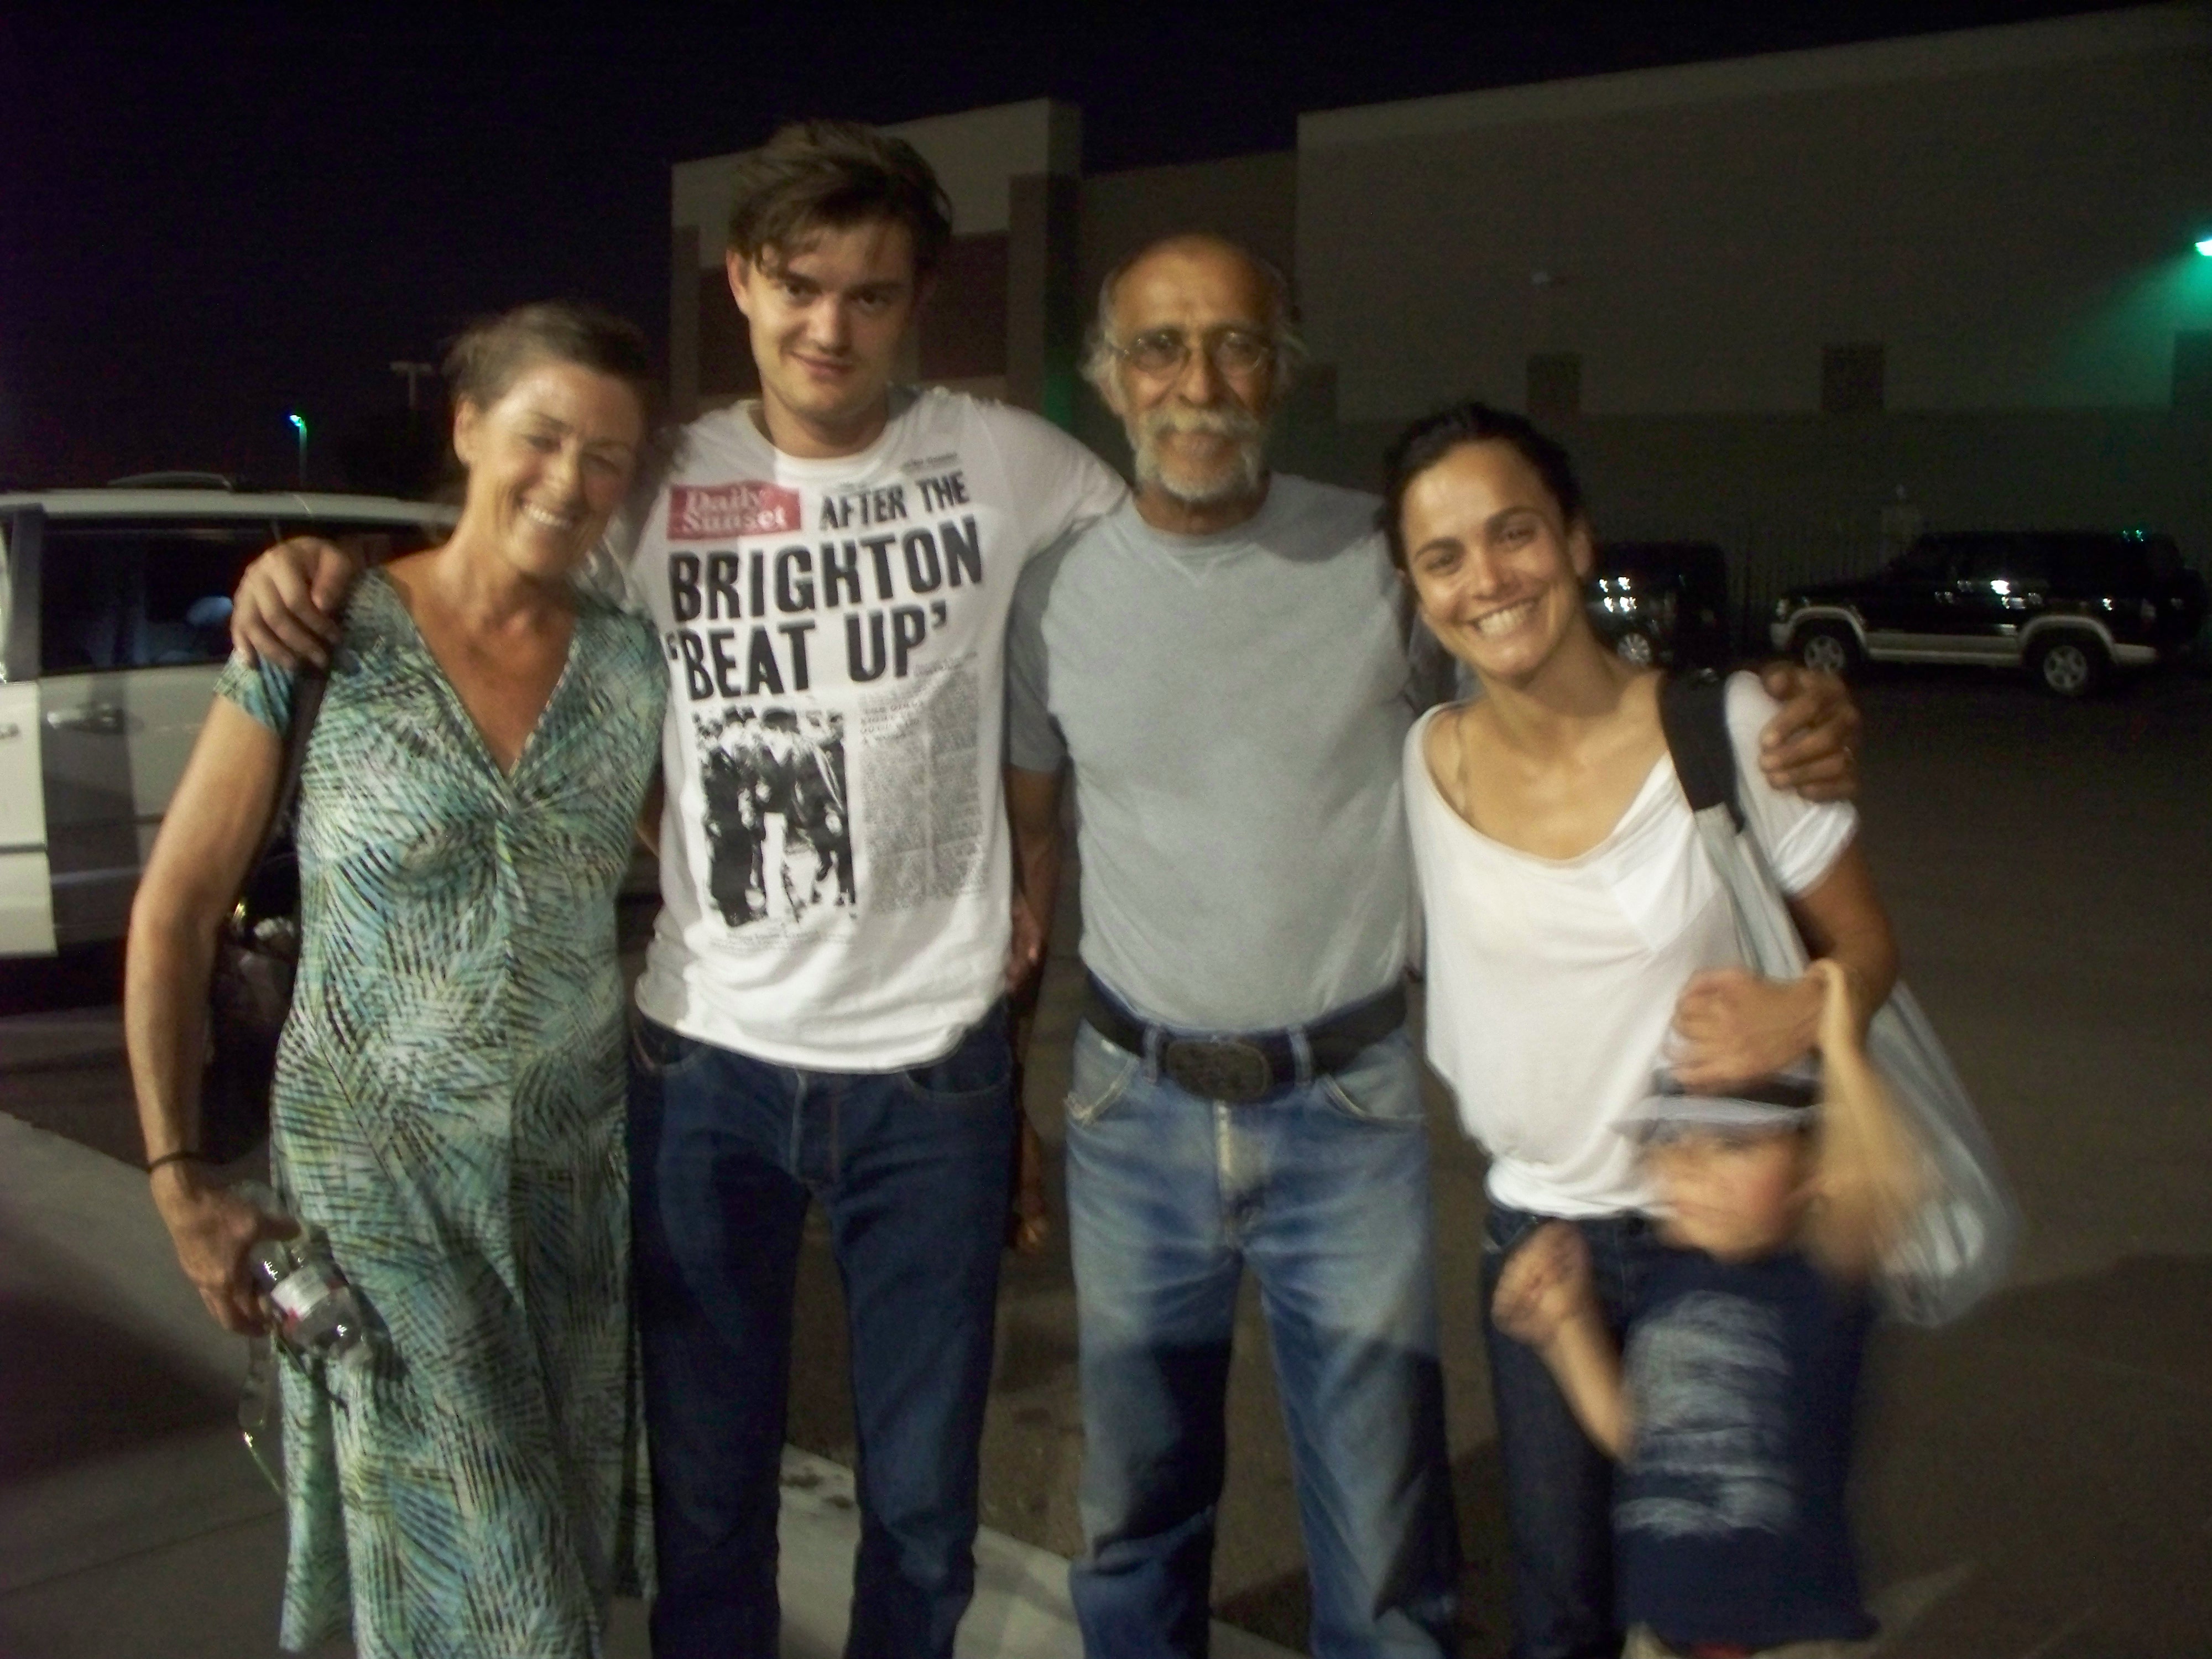 Filming On the Road with from left to right: Barbara Glover, Sam Riley, Ricardo Andres, Alice Braga, Jacob Ortiz